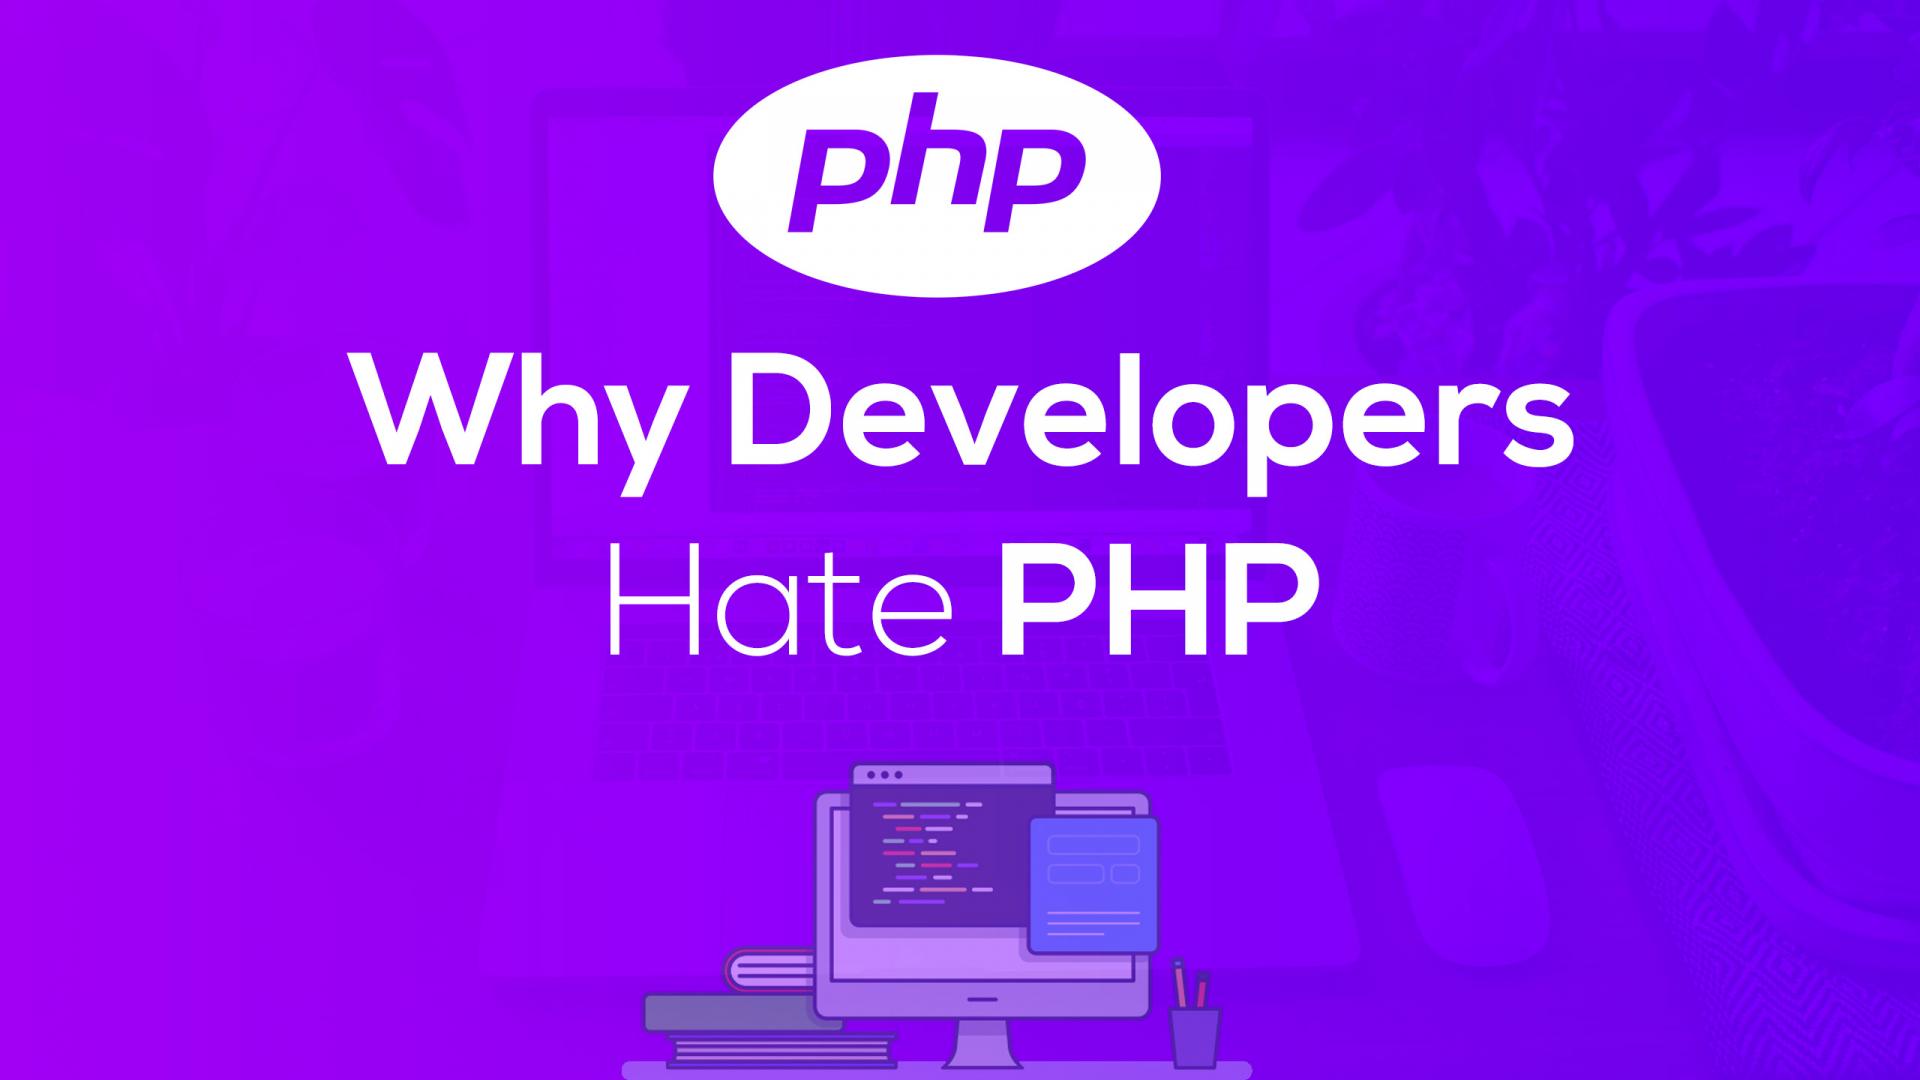 Why developers hate PHP